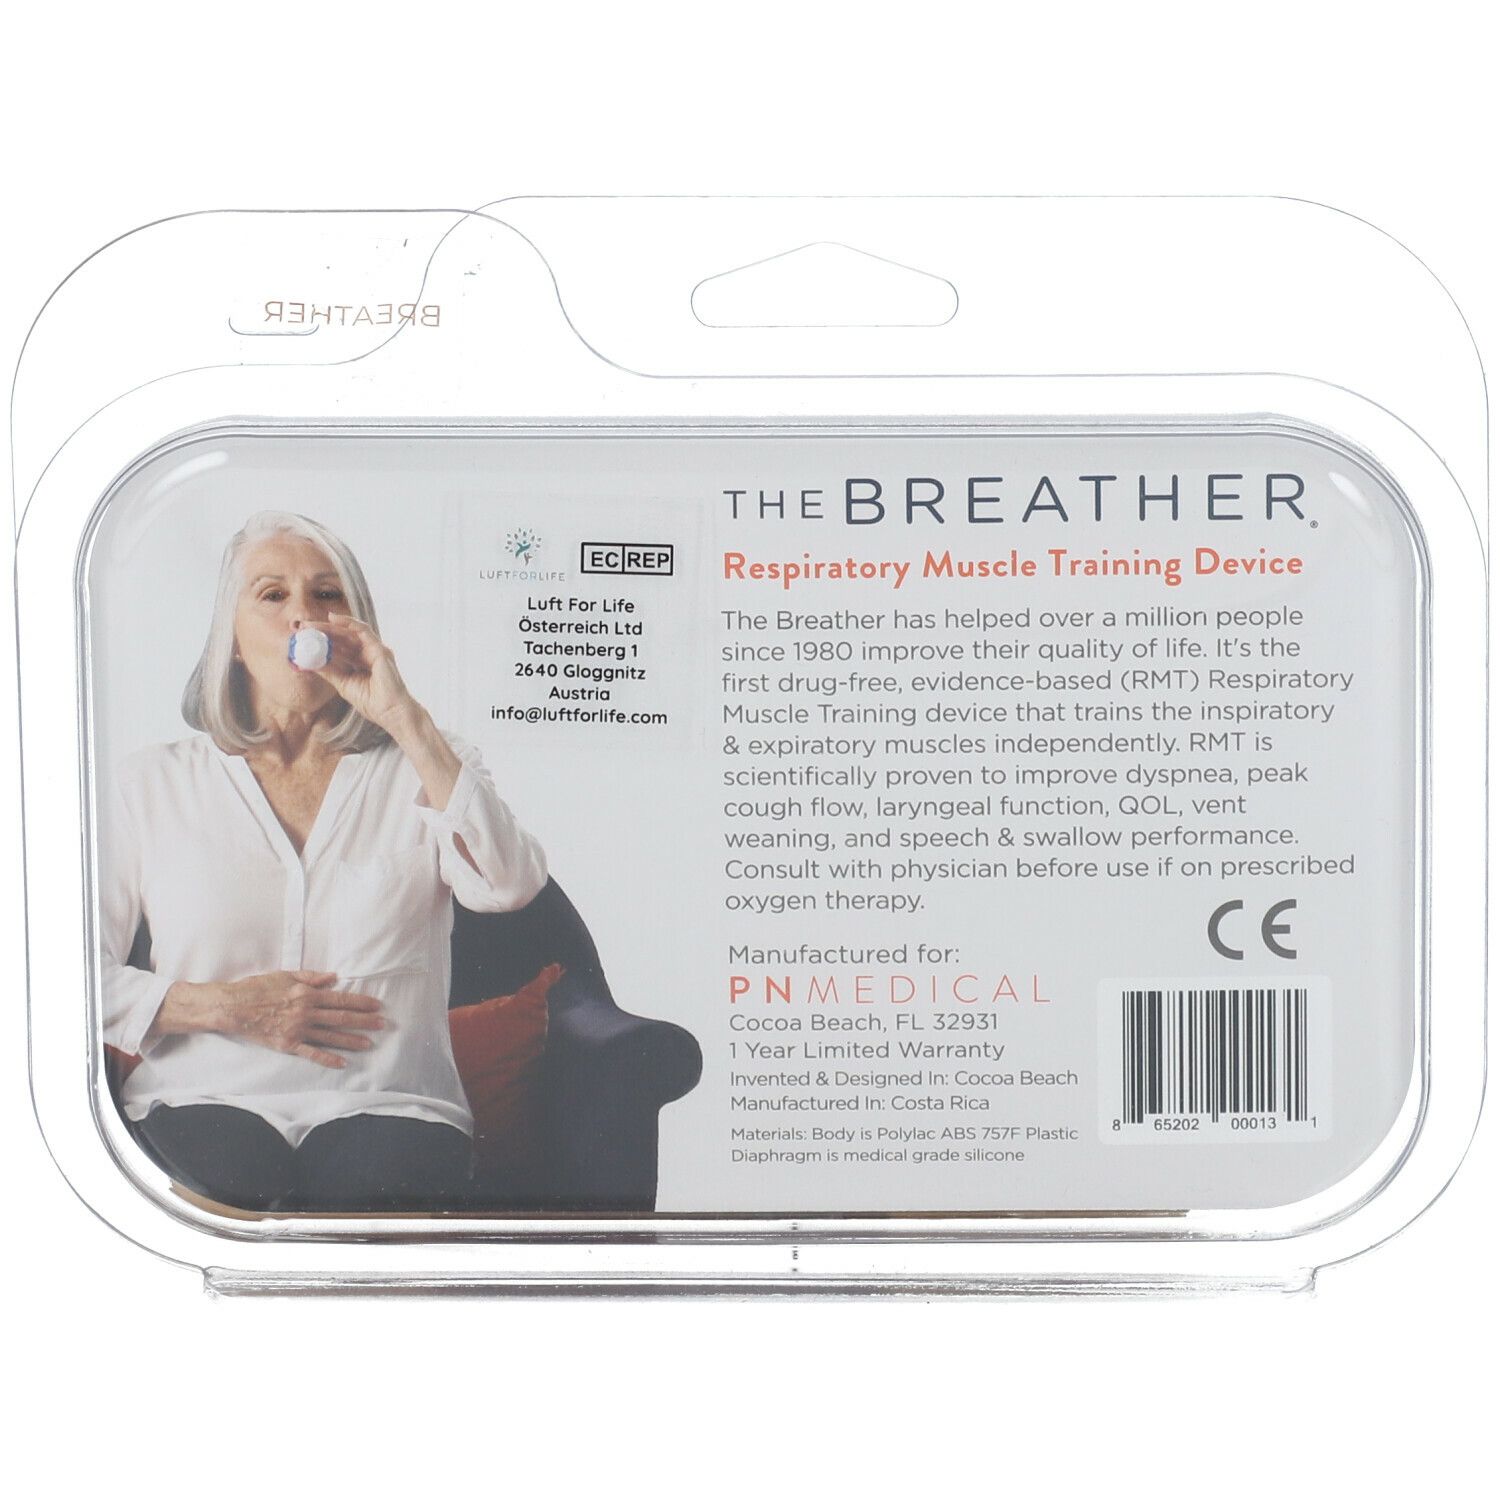 THE BREATHER®